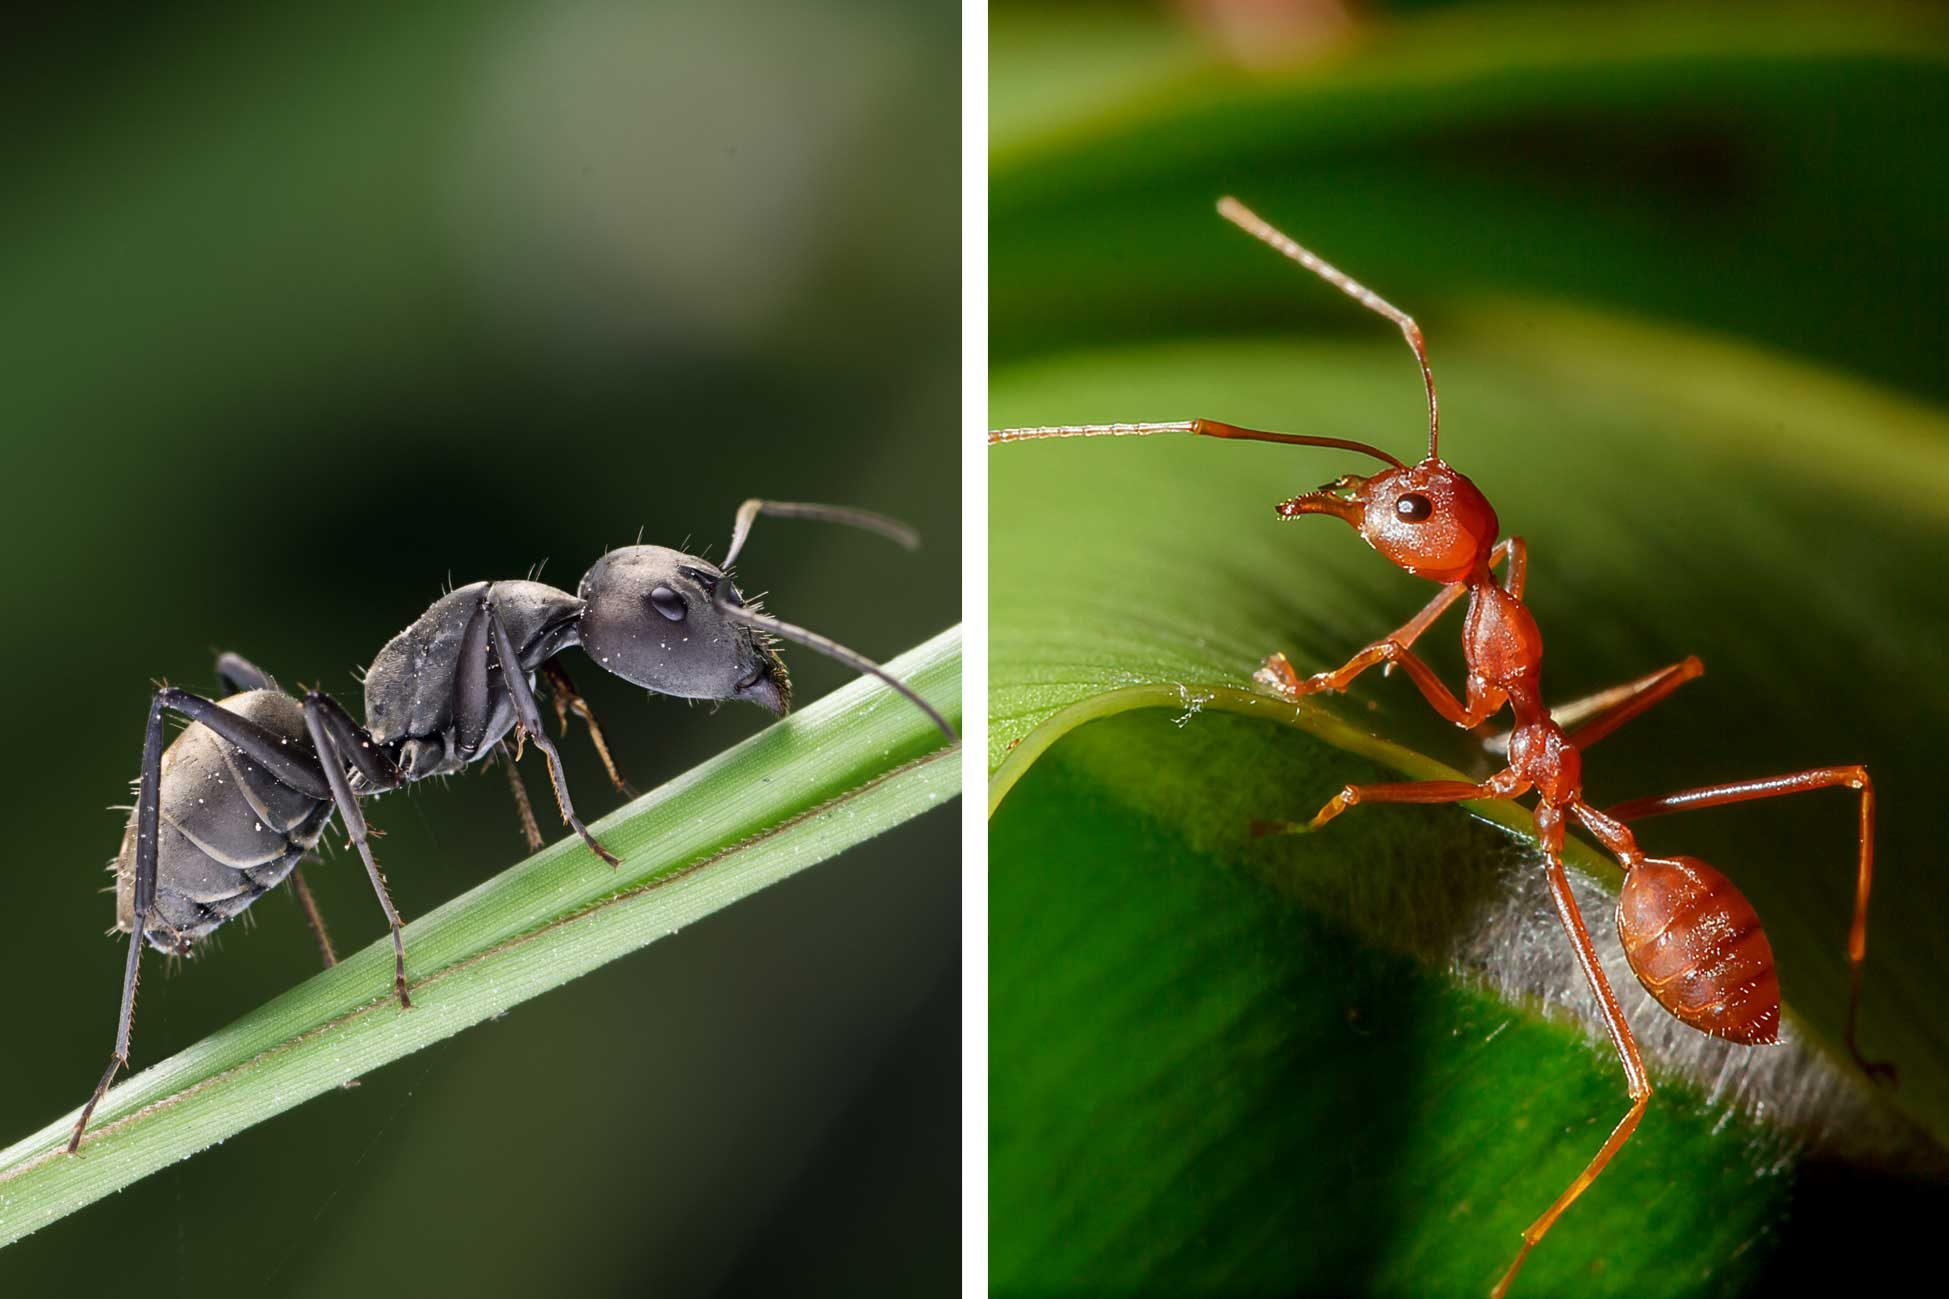 Red Ants vs. Fire Ants: What's the Difference?